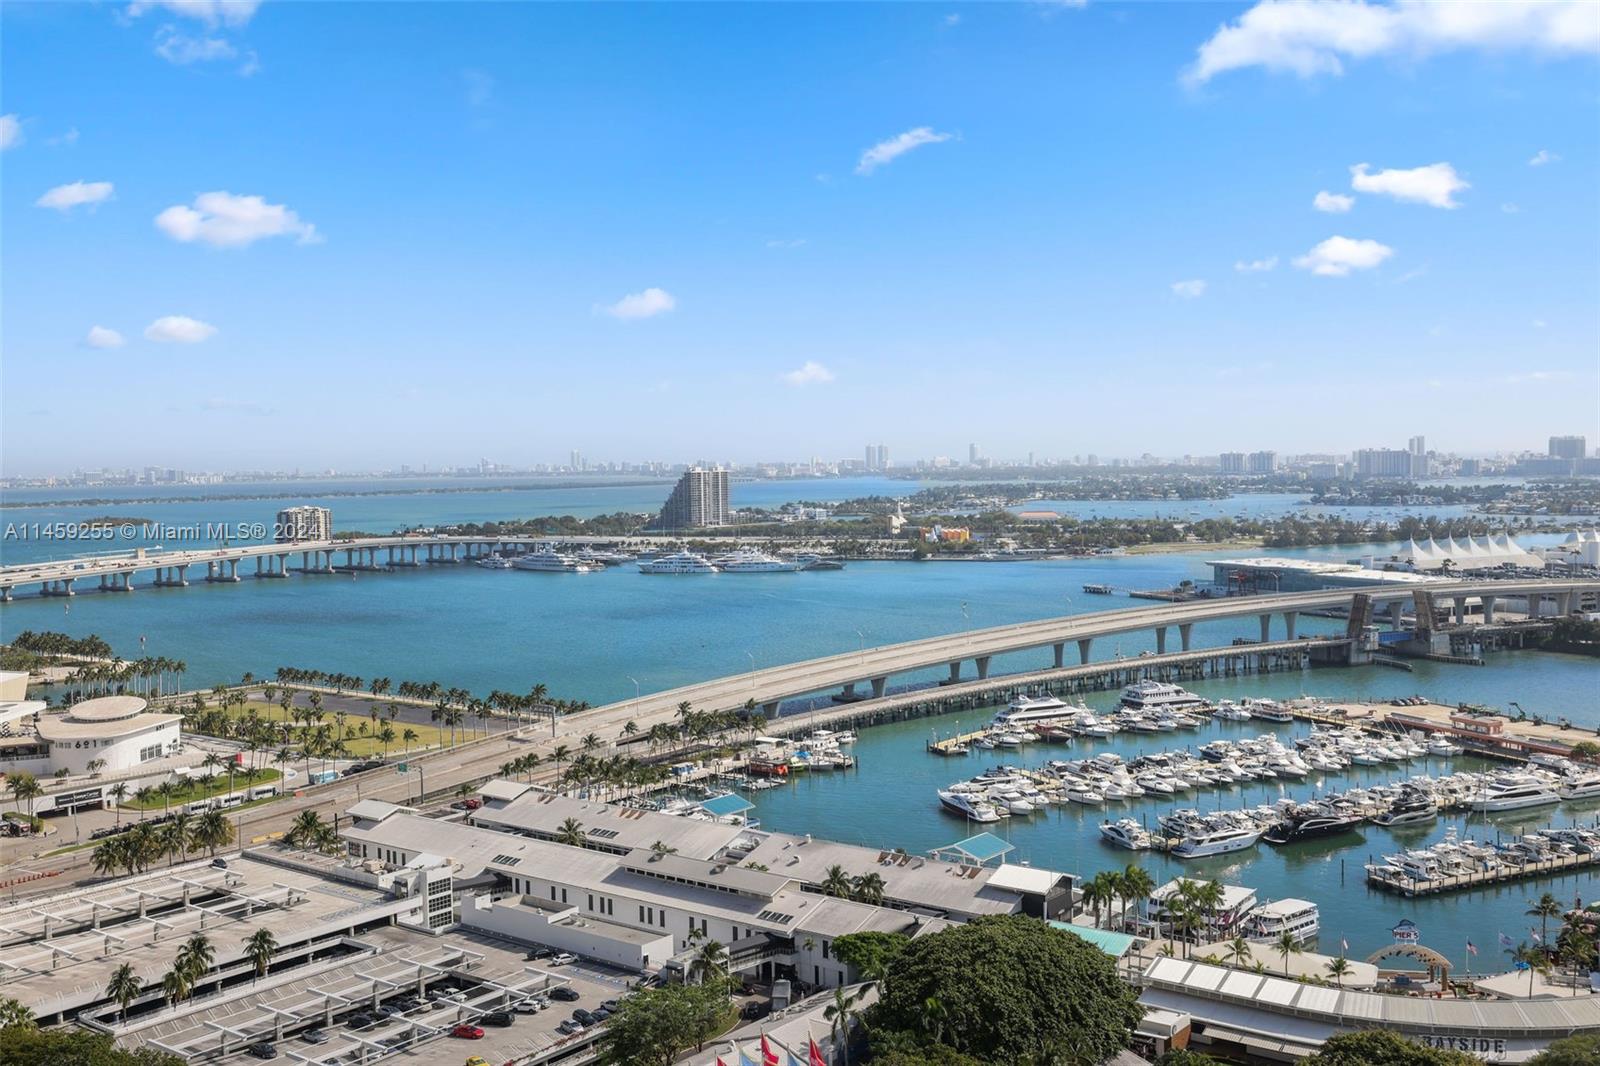 SPACIOUS 2 BEDROOM LAYOUT WITH STUNNING VIEWS OF BISCAYNE BAY AND DOWNTOWN MIAMI. CORNER UNIT WITH AN EXTENDED WRAPAROUND TERRACE, OPEN FLOORPLAN, ONE ASSIGNED PARKING SPACE AND STORAGE CAGE INCLUDED IN SALE. UNIT HAS BEEN FRESHLY PAINTED AND HAS NEW AC UNIT INSTALLED 2023. VIZCAYNE OFFERS LUXURIOUS AMENITIES WITH 4 POOLS, STATE OF THE ART GYM, CLUBHOUSE, SPA, THEATER AND MEDIA ROOM, BUSINESS CENTERS, ETC. FANTASTIC LOCATION WITH ALL THE BEST DOWNTOWN HAS TO OFFER WITHIN FOOTSTEPS. BUILDING ALLOWS 30 DAY MINIMUM RENTALS GREAT FOR INVESTORS. EASY ACCESS TO METRORAIL, BRIGHTLINE, AND MORE. UNIT IS VACANT AND EASY TO SHOW CALL OR TEXT LA FOR APPOINTMENT.